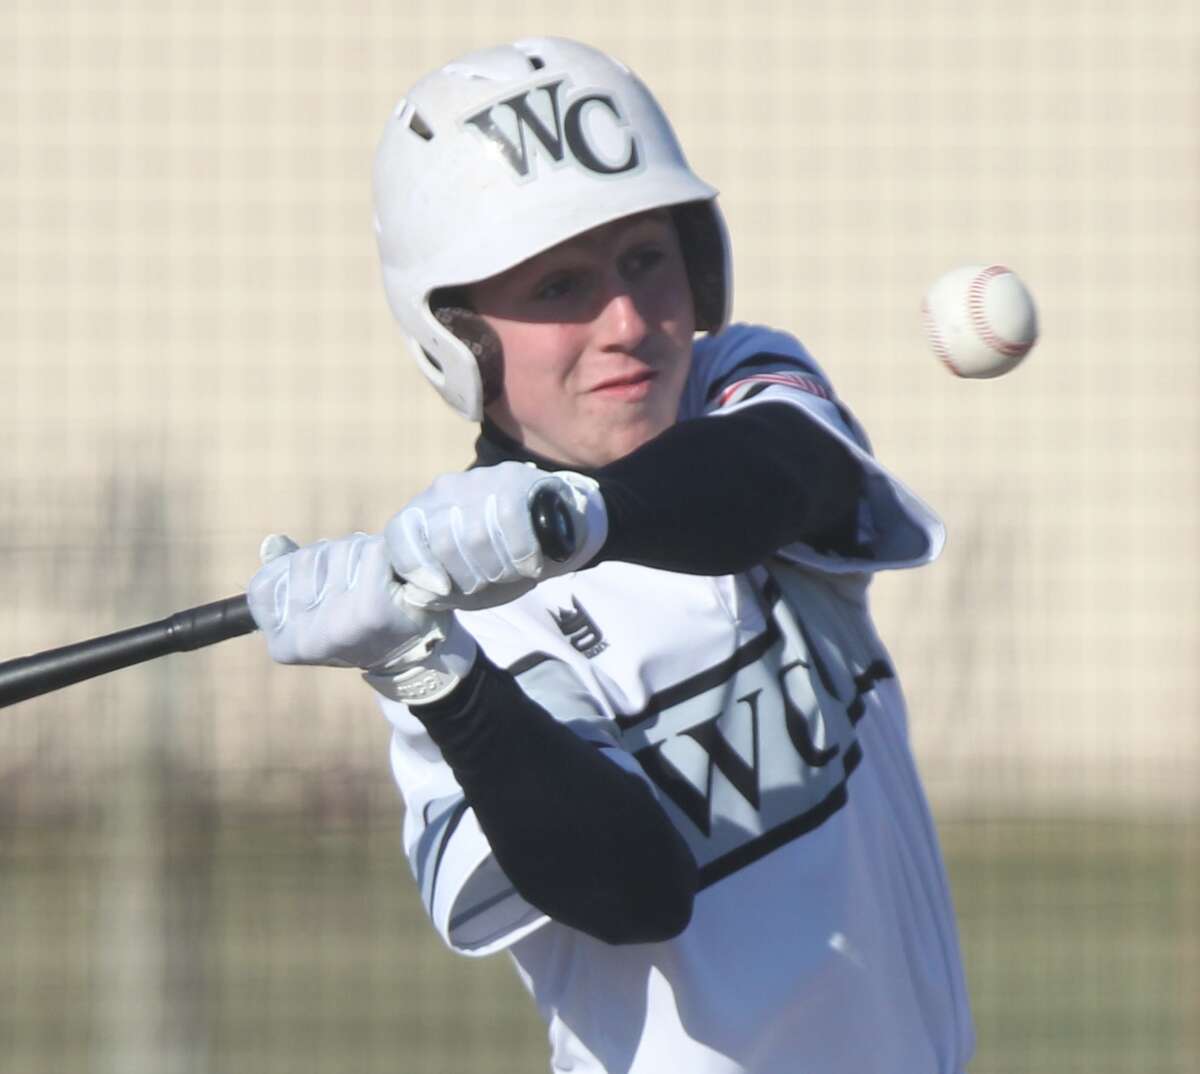 Action from the West Central baseball team's win over Carrollton in Tuesday's season opener at Winchester